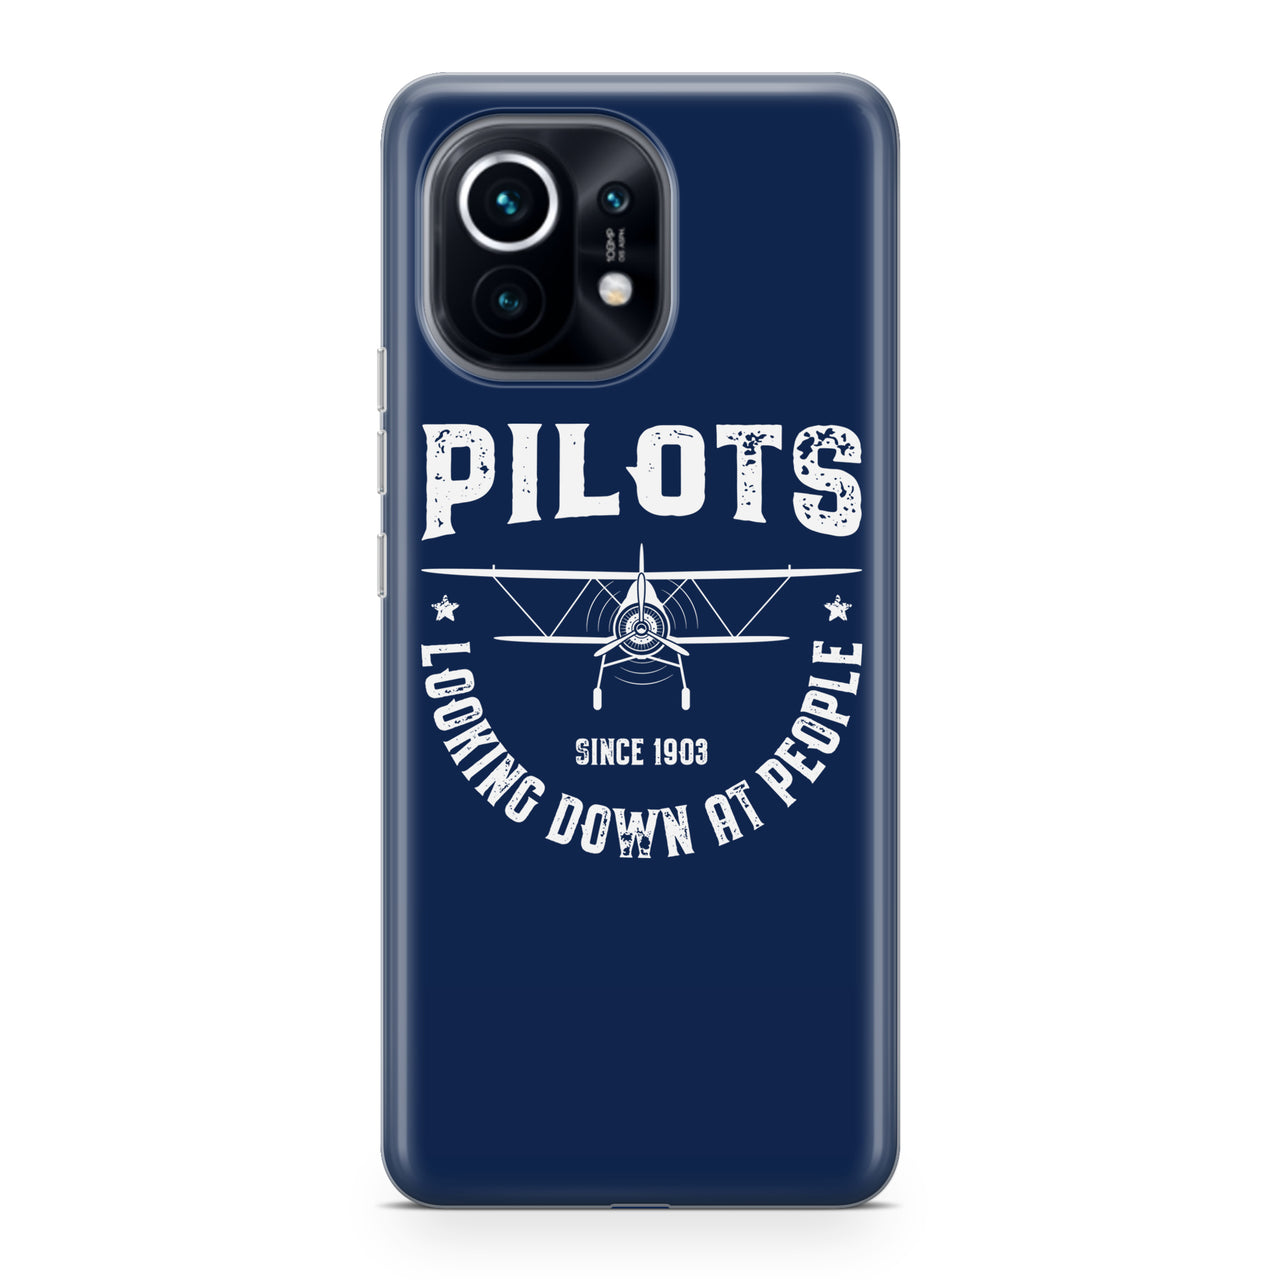 Pilots Looking Down at People Since 1903 Designed Xiaomi Cases